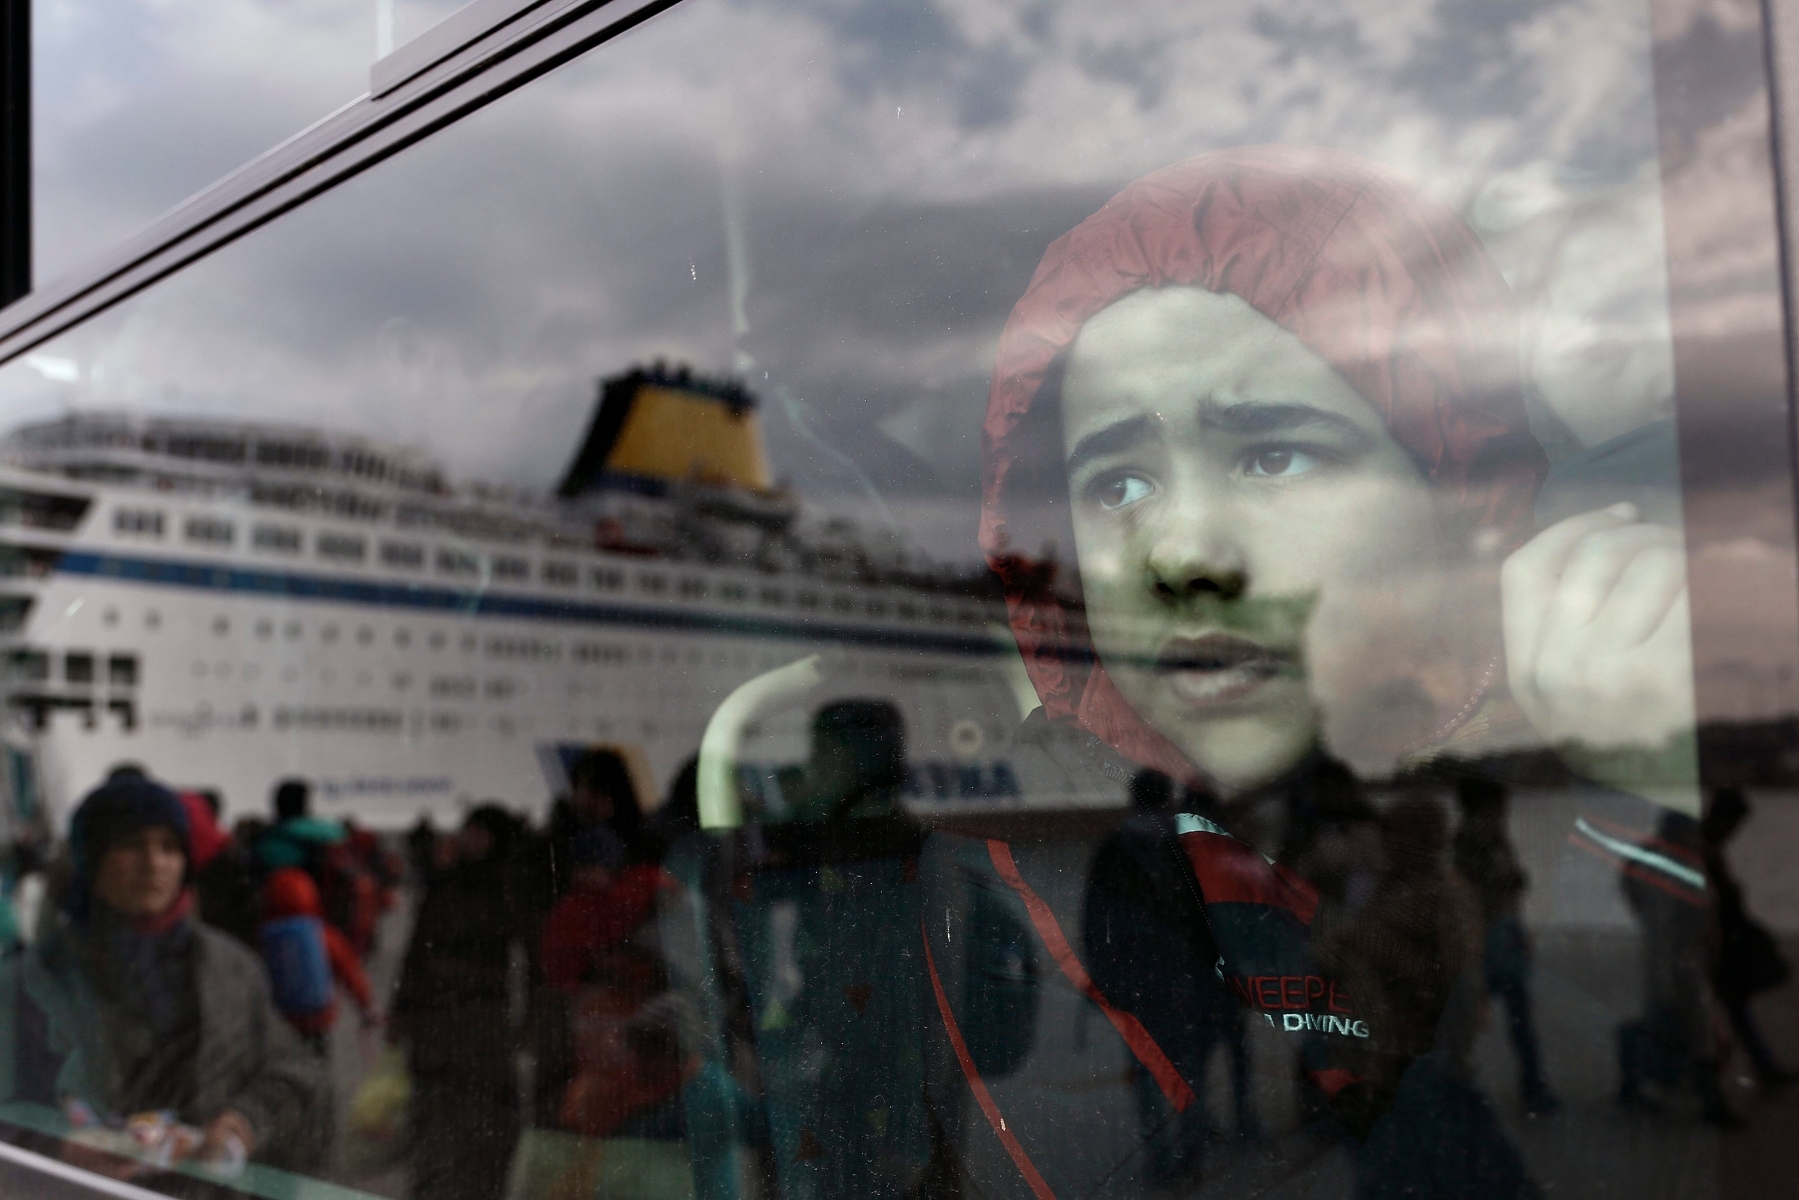 epa05120127 A refugee boy looks on inside a bus as the ferry 'Eleftherios Venizelos is reflected on it, after its arrival at the port of Piraeus, near Athens, Greece, 23 January 2016. The ship 'Eleftherios Venizelos' arrived at the port of Piraeus carrying about 2,500 refugees and migrants that had landed on the Greek island of Myilene, coming from Turkey. Thousands of migrants continue to arrive on the Greek islands, after having crossed the Aegean sea, on their way to the European Union countries.  EPA/YANNIS KOLESIDIS GREECE REFUGEES MIGRANTS SITUATION